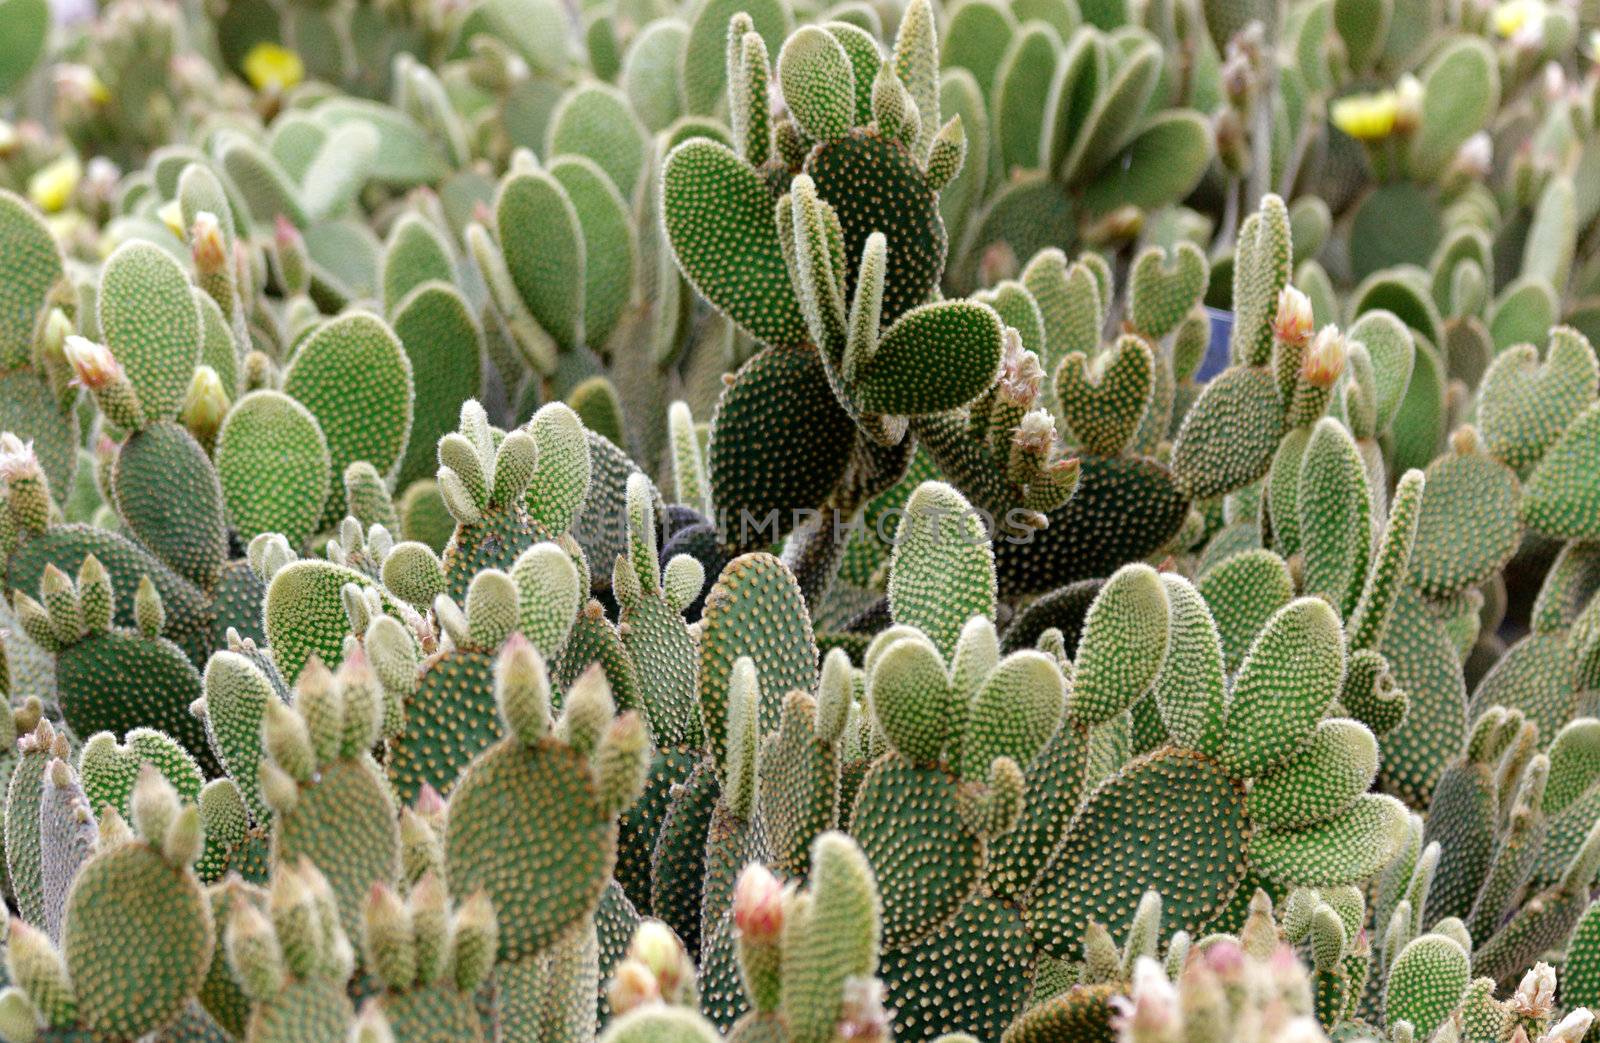 View of a cactus by Roka